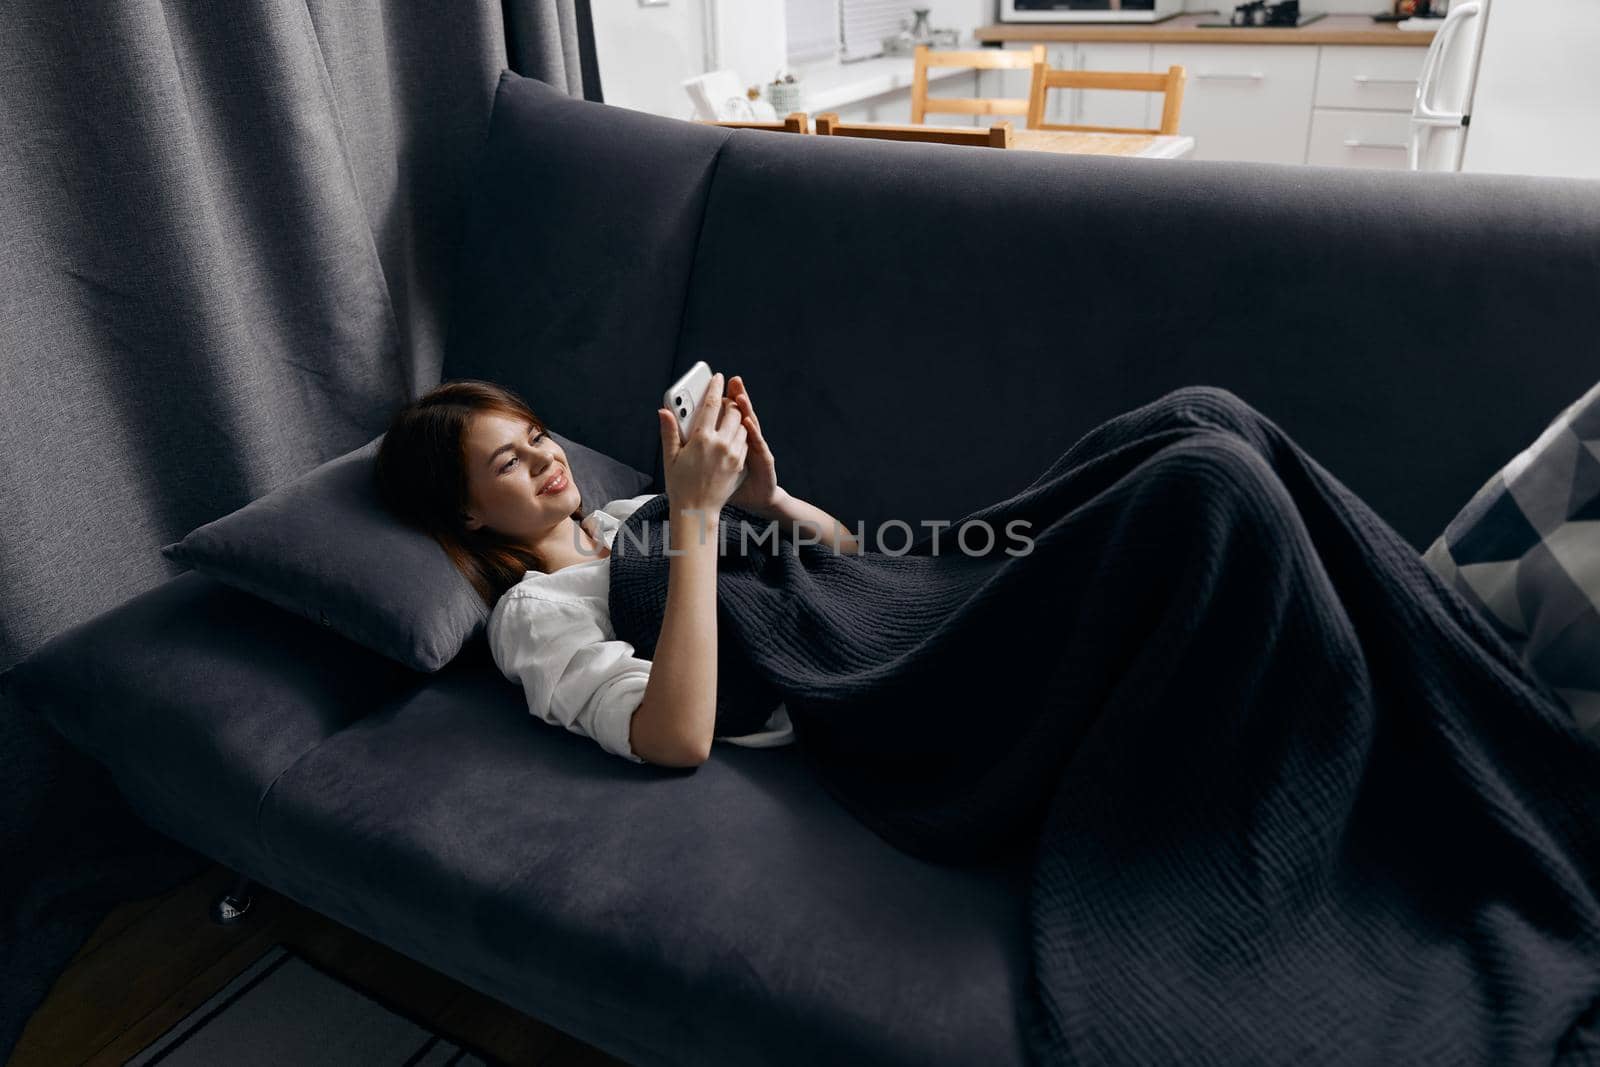 a woman with a mobile phone lies on a gray sofa near the window in the background by SHOTPRIME